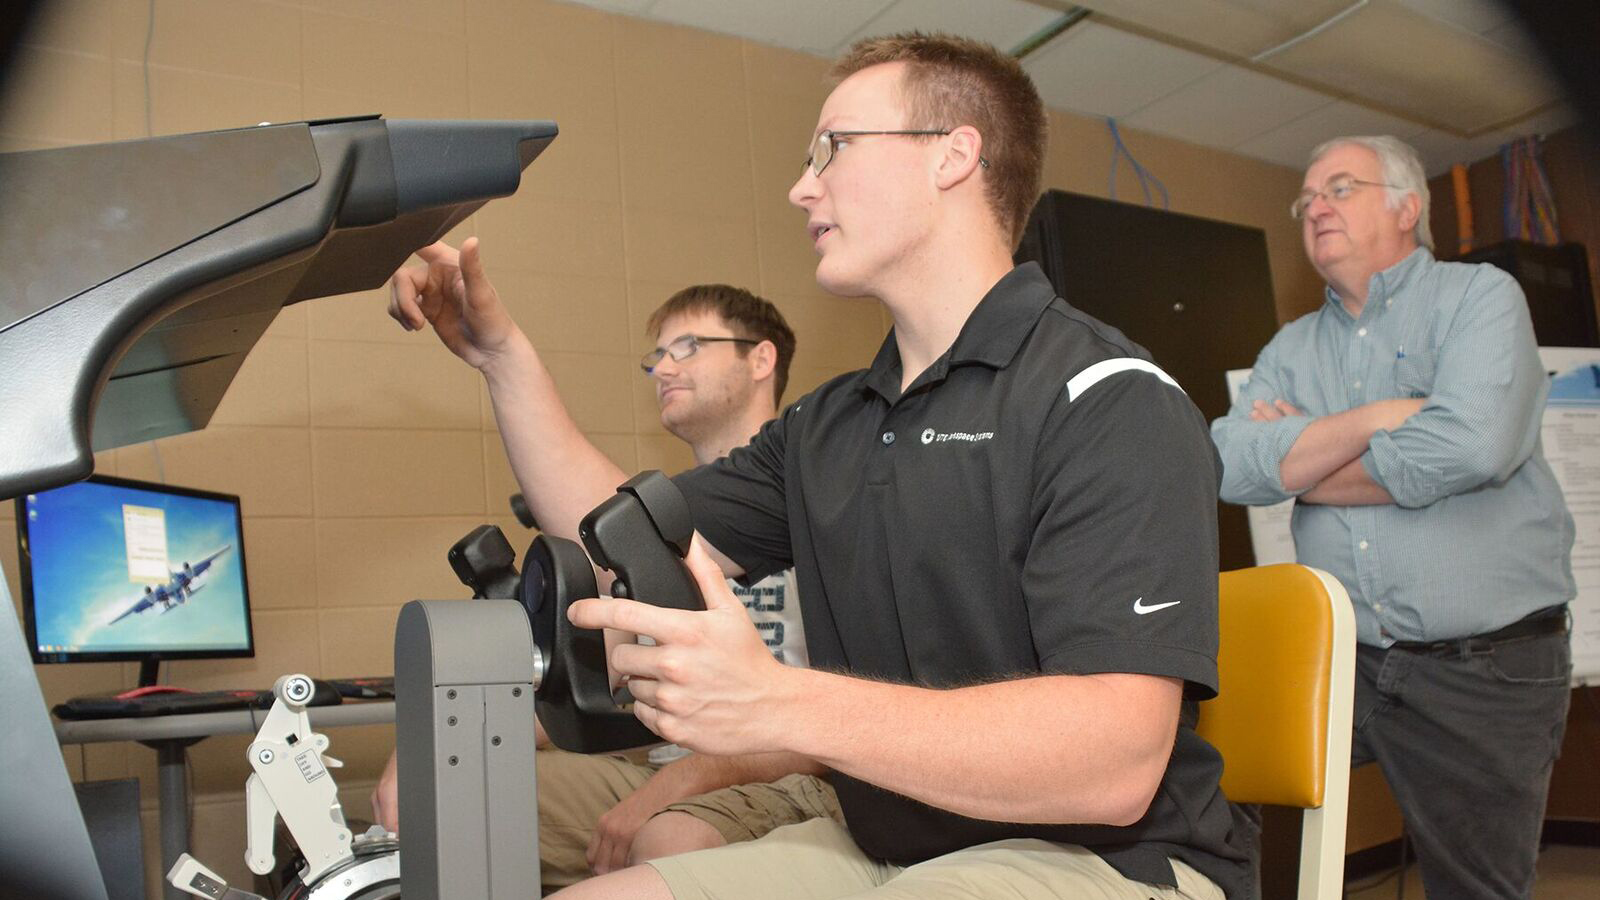 Sam Coffin, senior, electrical engineering major from Billings, Montana (left); Ted Schoper, junior, electrical engineering major from Baudette, Minnesota; and Scott Rausch, interim head of the Department of Electrical & Computer Engineering at the South Dakota School of Mines & Technology, at the flight simulator designed and built by students. Photo courtesy of Fran LeFort.